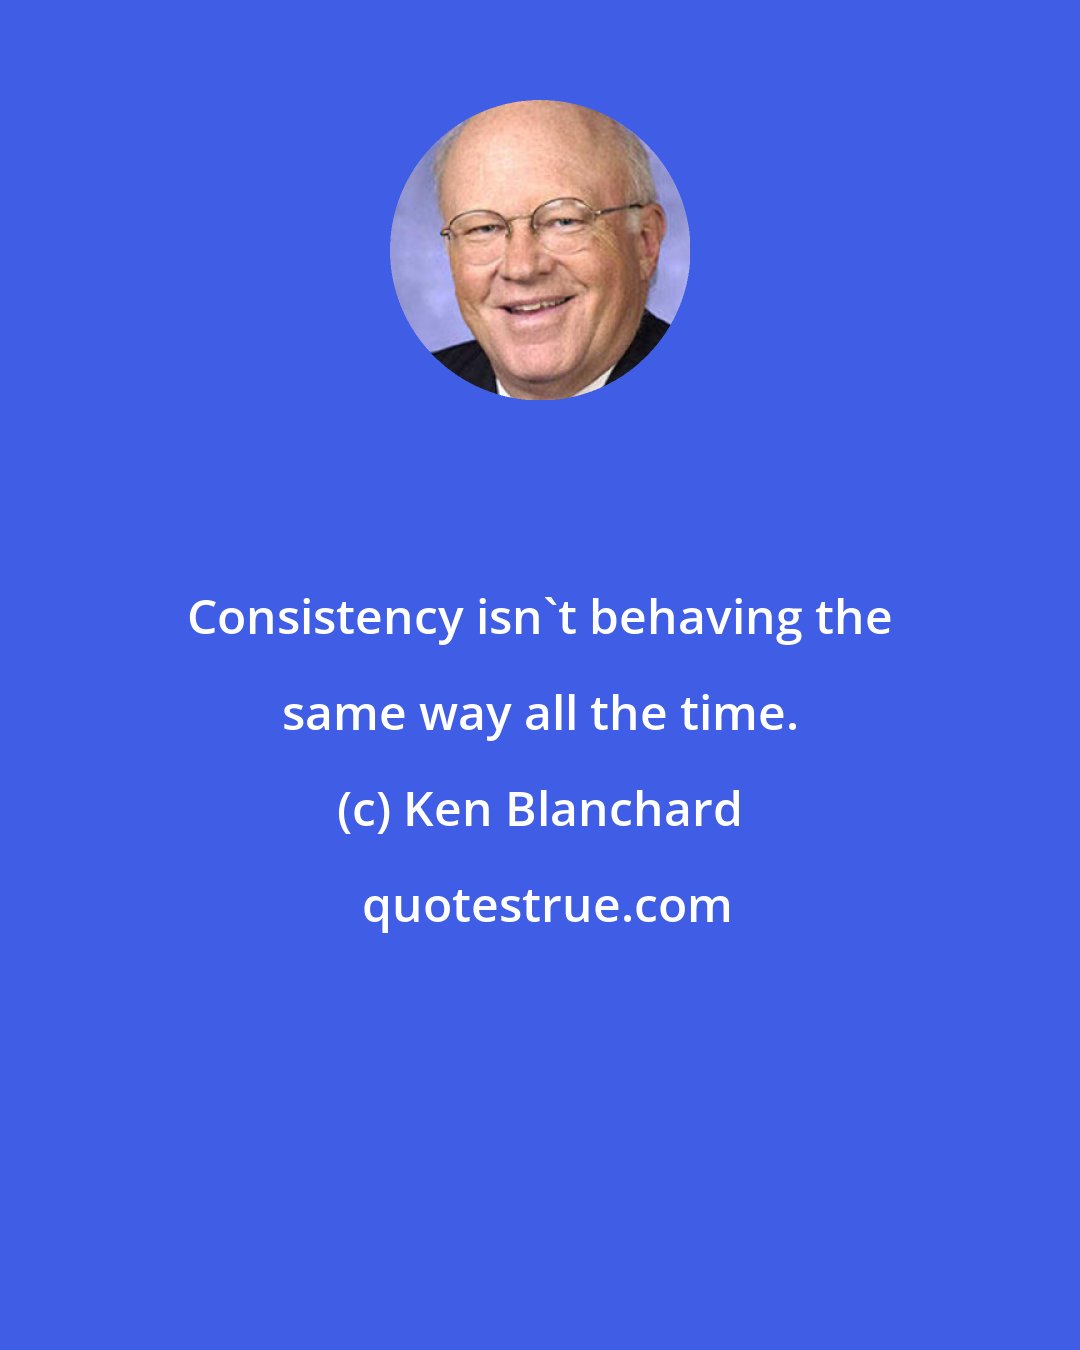 Ken Blanchard: Consistency isn't behaving the same way all the time.